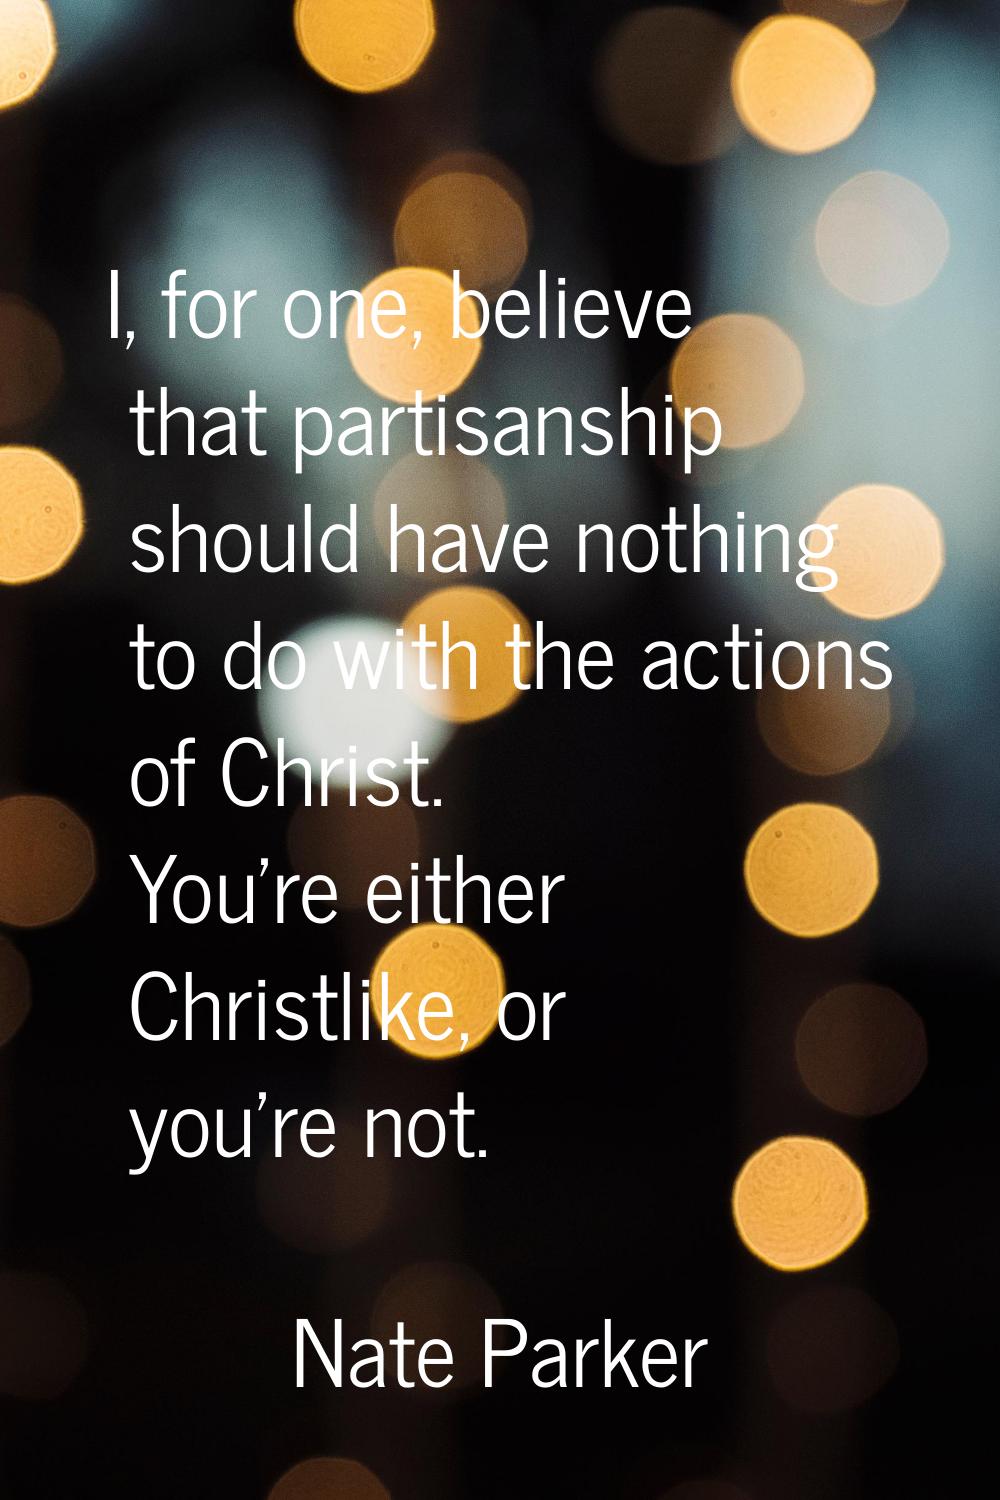 I, for one, believe that partisanship should have nothing to do with the actions of Christ. You're 